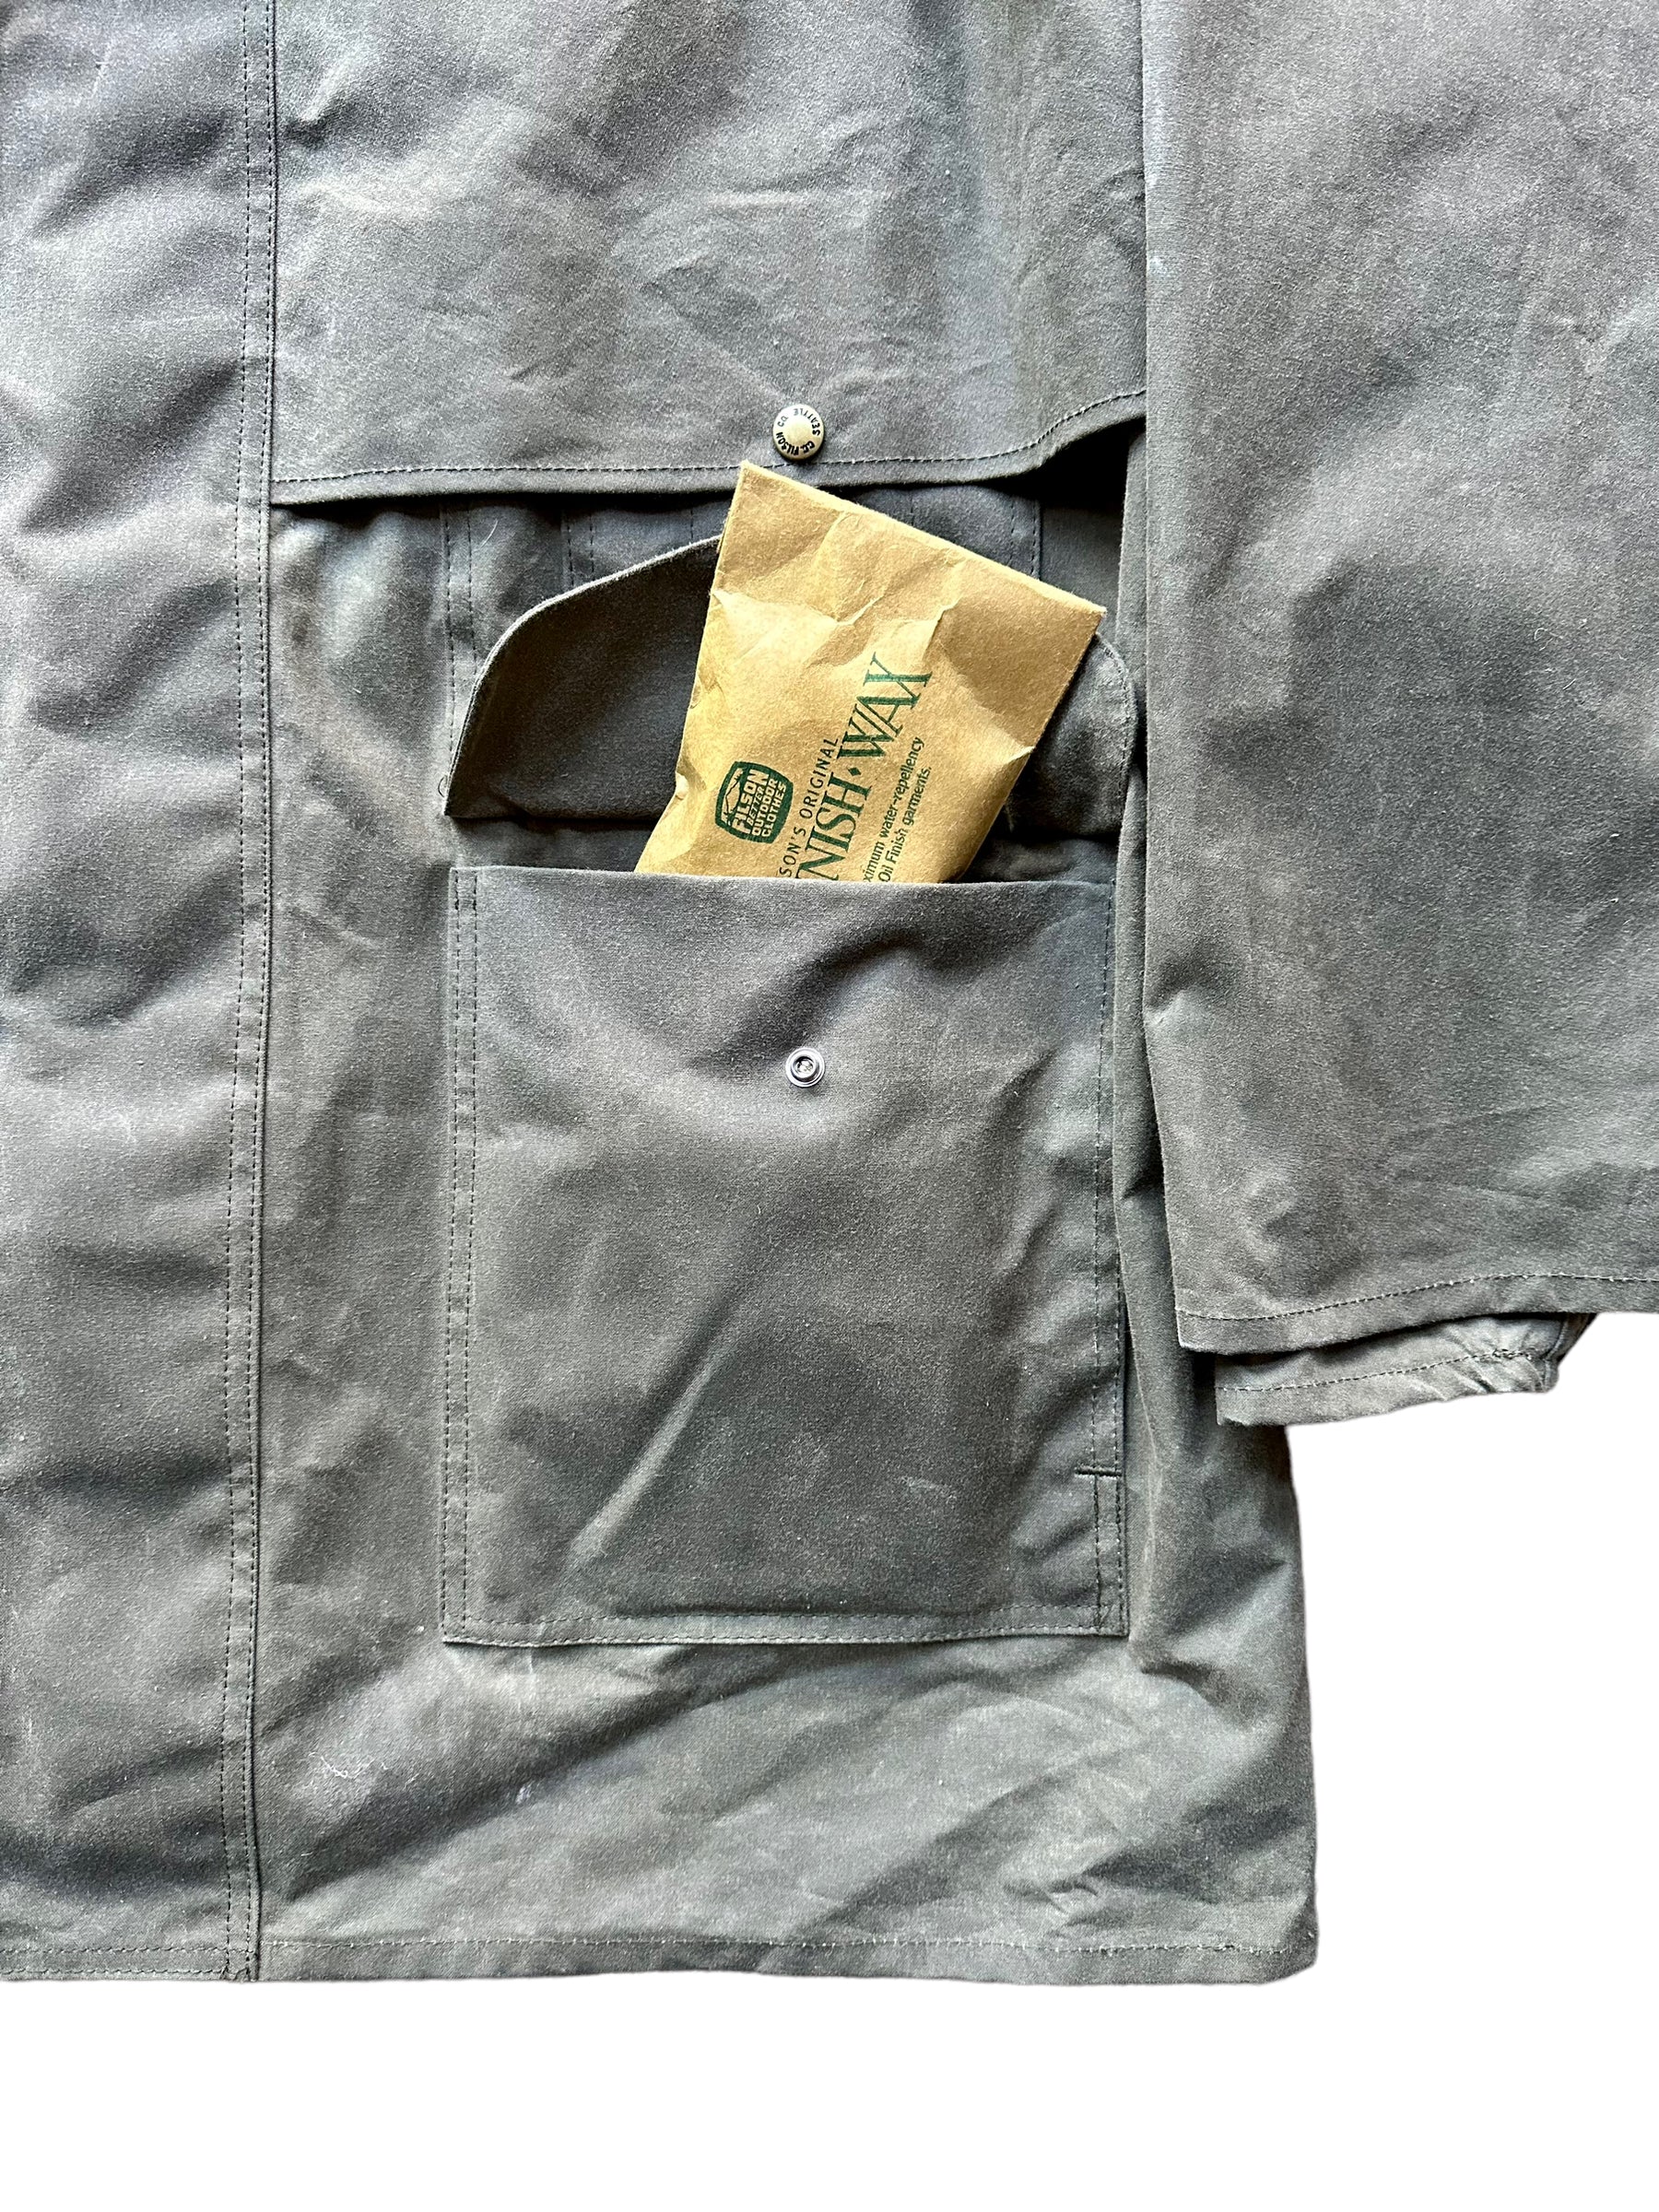 NWT Vintage Filson Shelter Cloth Packer Coat SZ 46 | Barn Owl Vintage Goods  Filson | Vintage Filson Tin Cloth Workwear Seattle